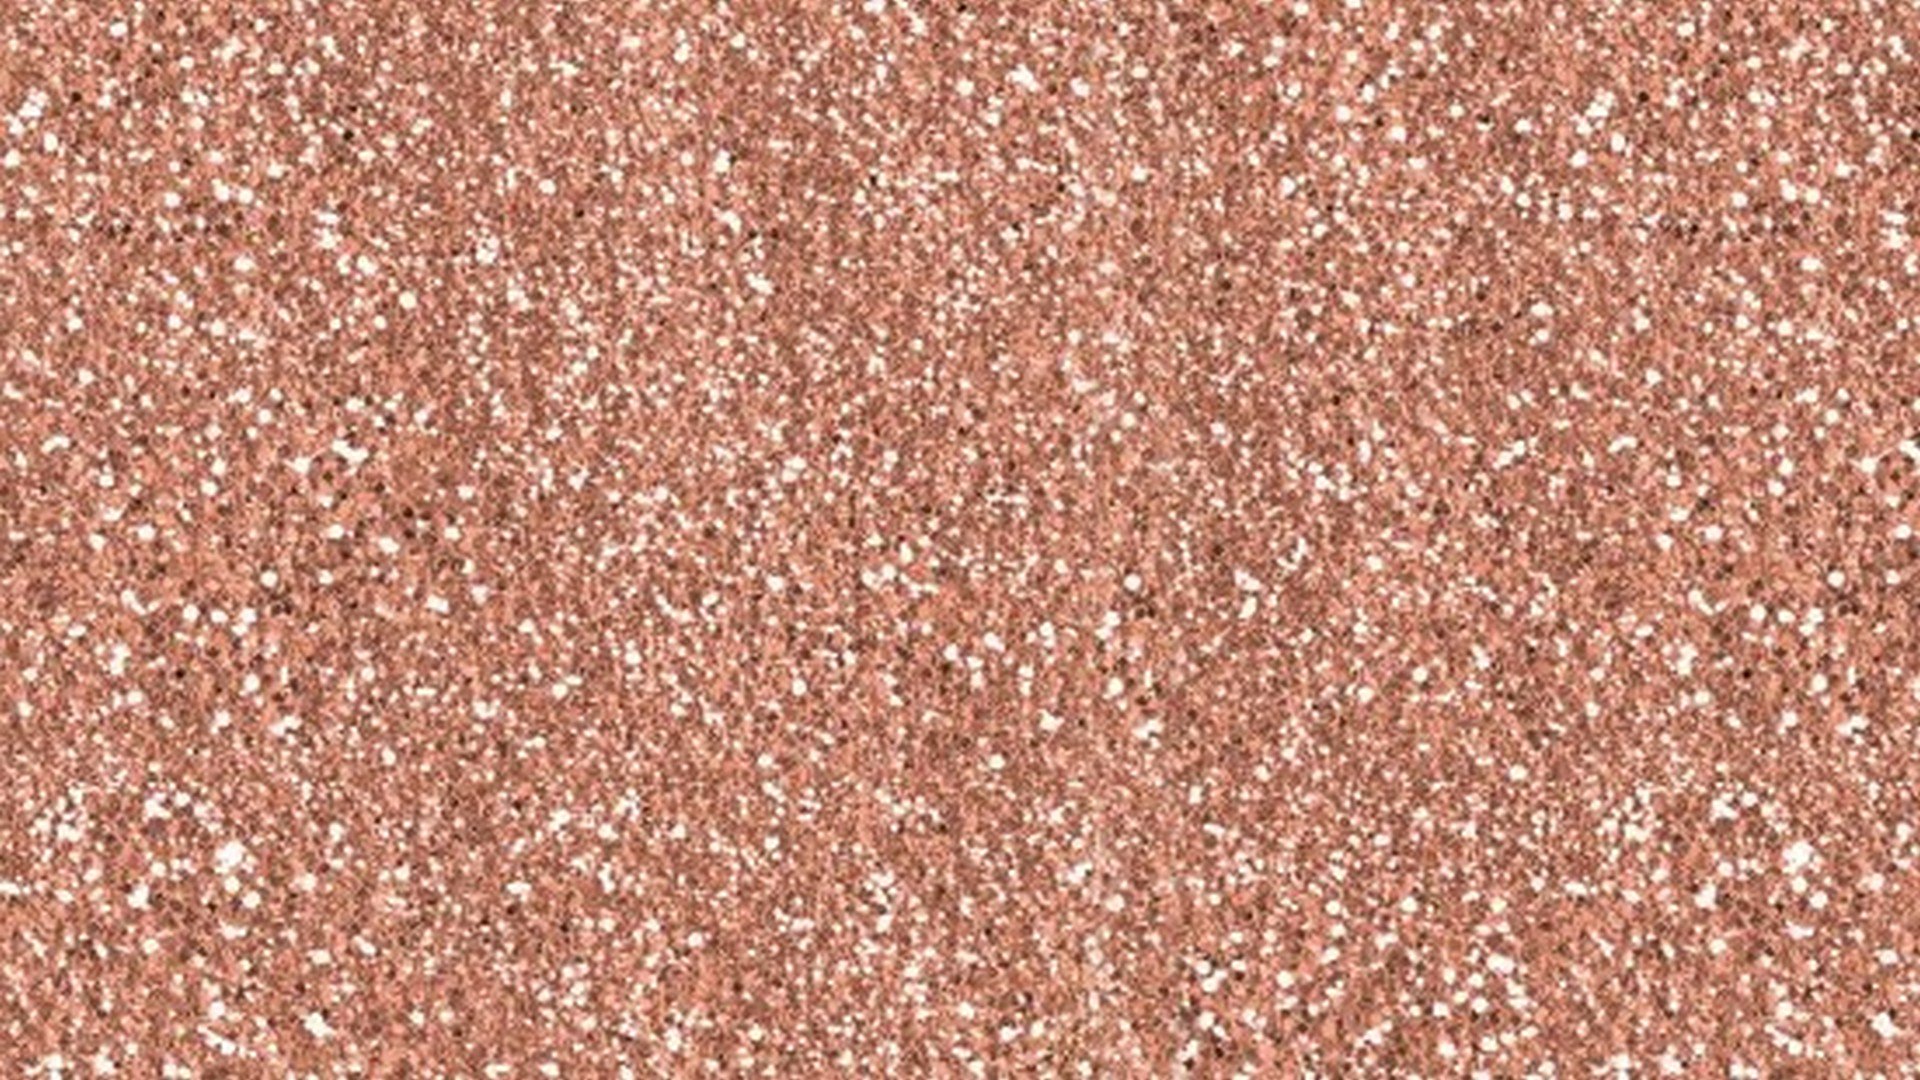 45381 Rose Gold Glitter Background Images Stock Photos  Vectors   Shutterstock